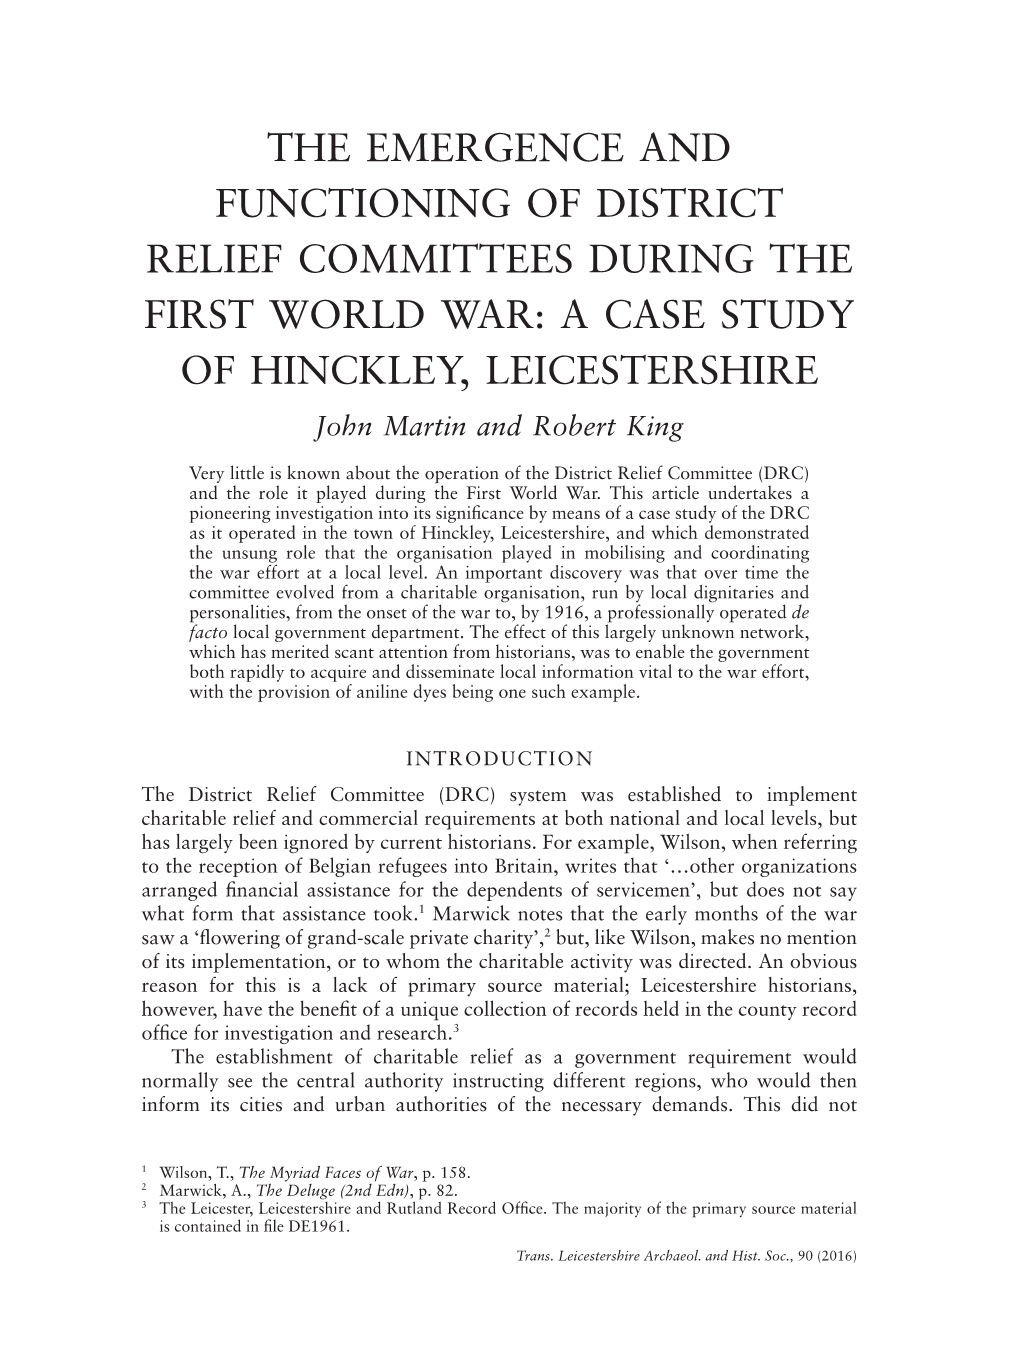 THE EMERGENCE and FUNCTIONING of DISTRICT RELIEF COMMITTEES DURING the FIRST WORLD WAR: a CASE STUDY of HINCKLEY, LEICESTERSHIRE John Martin and Robert King